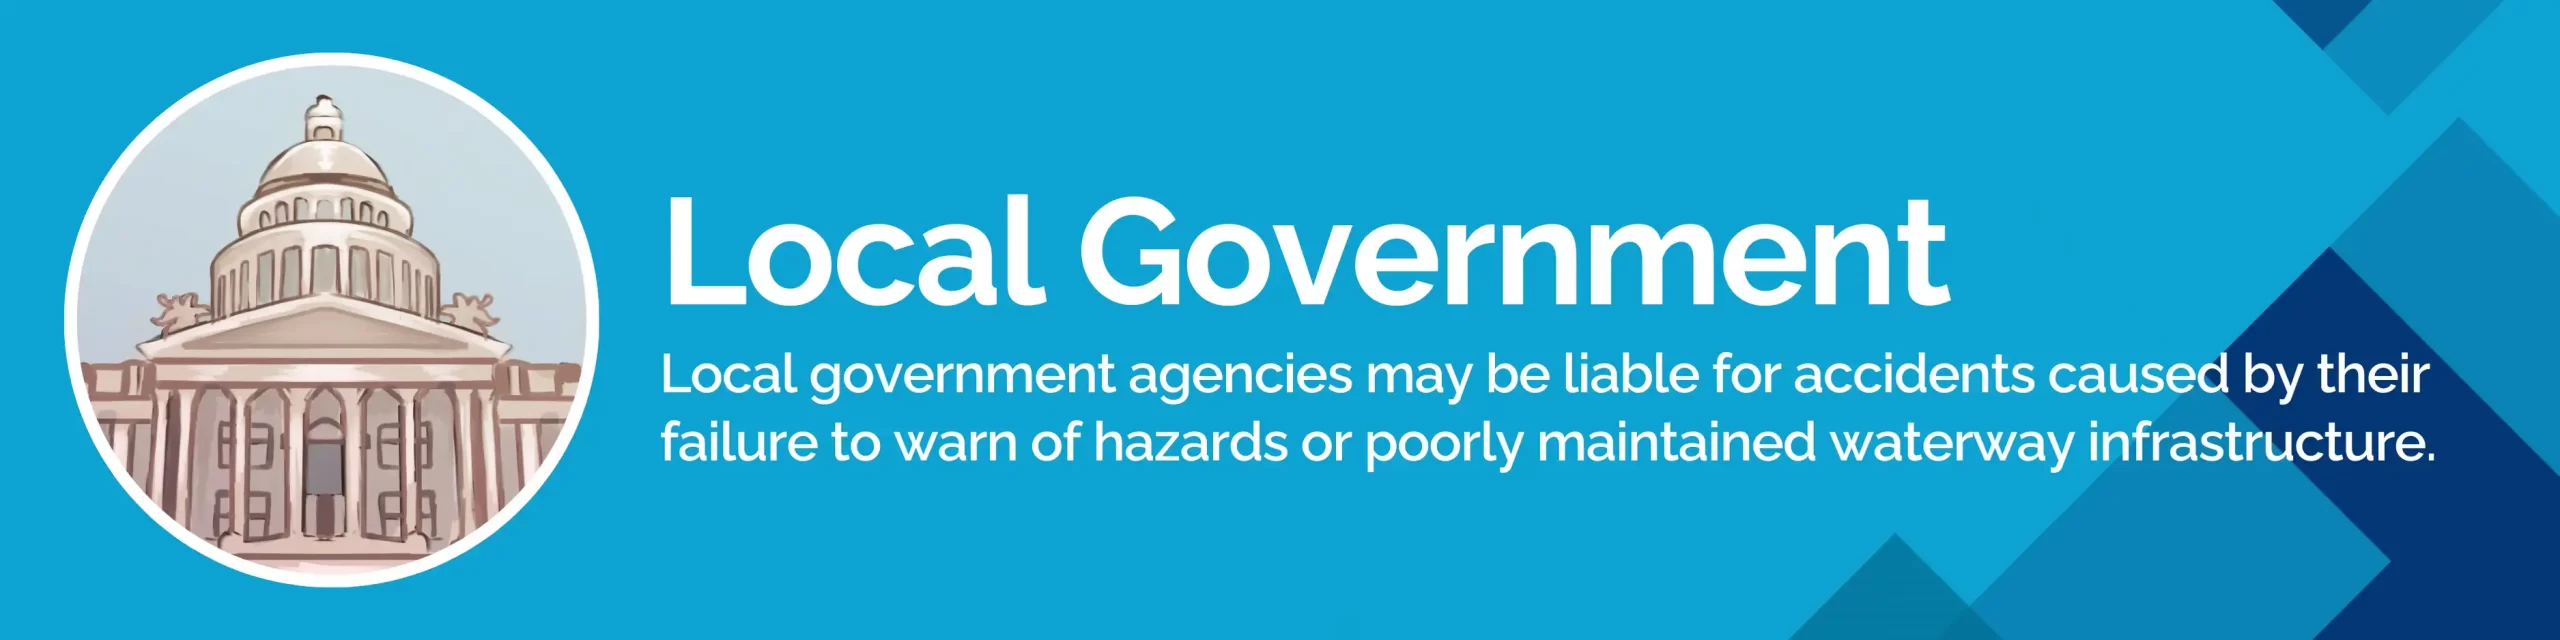 Image detailing how local government may be responsible for causing a boating accident, accompanied by an illustration of a government building